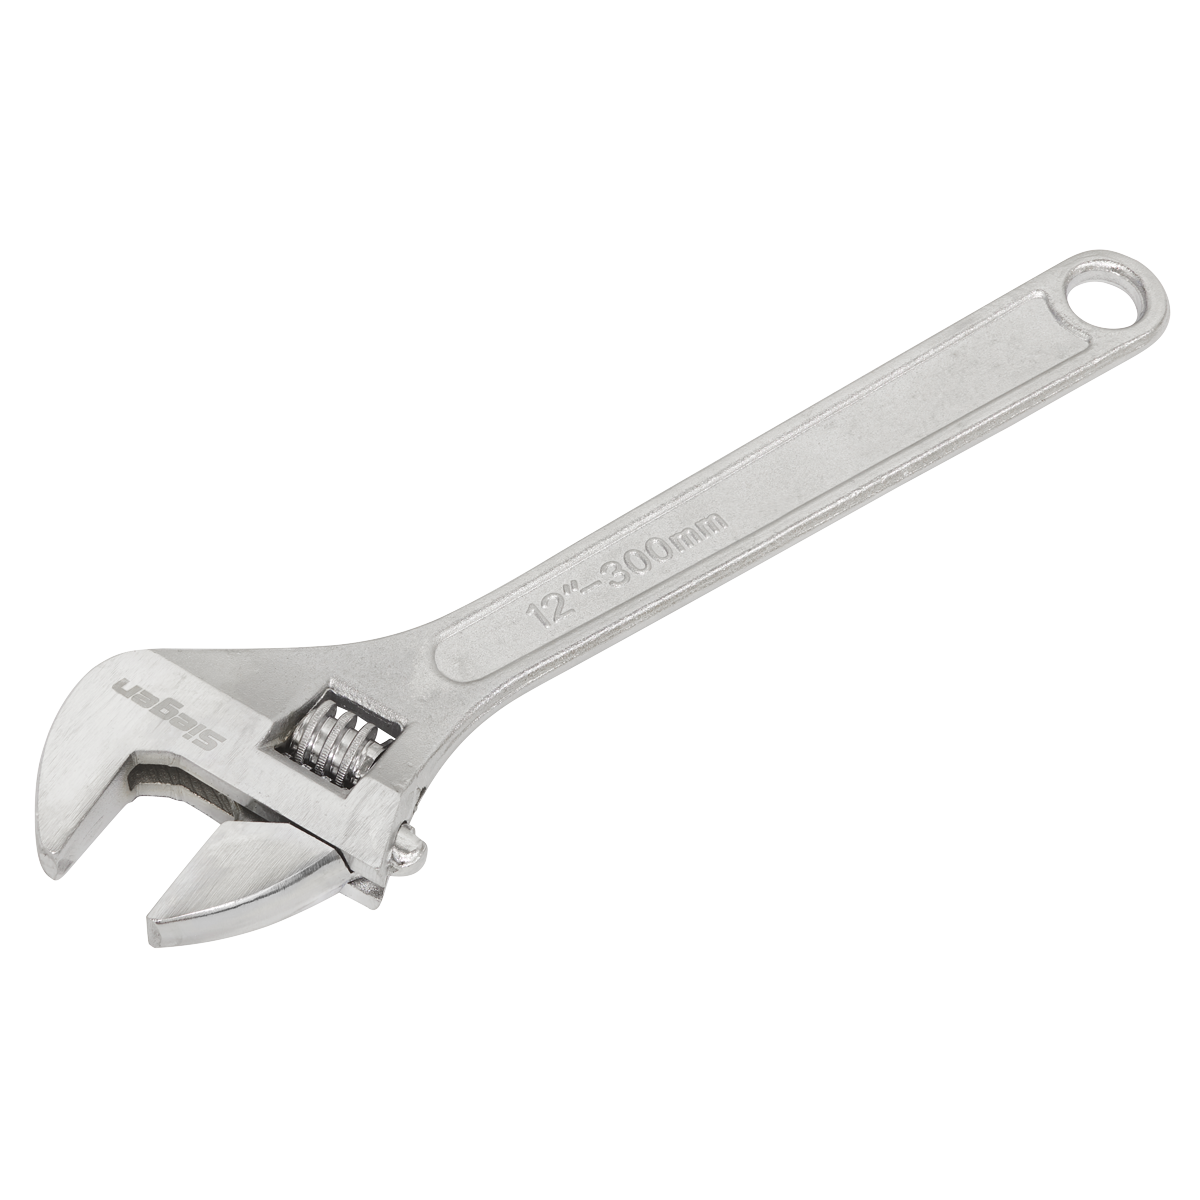 Adjustable Wrench 300mm - S0453 - Farming Parts